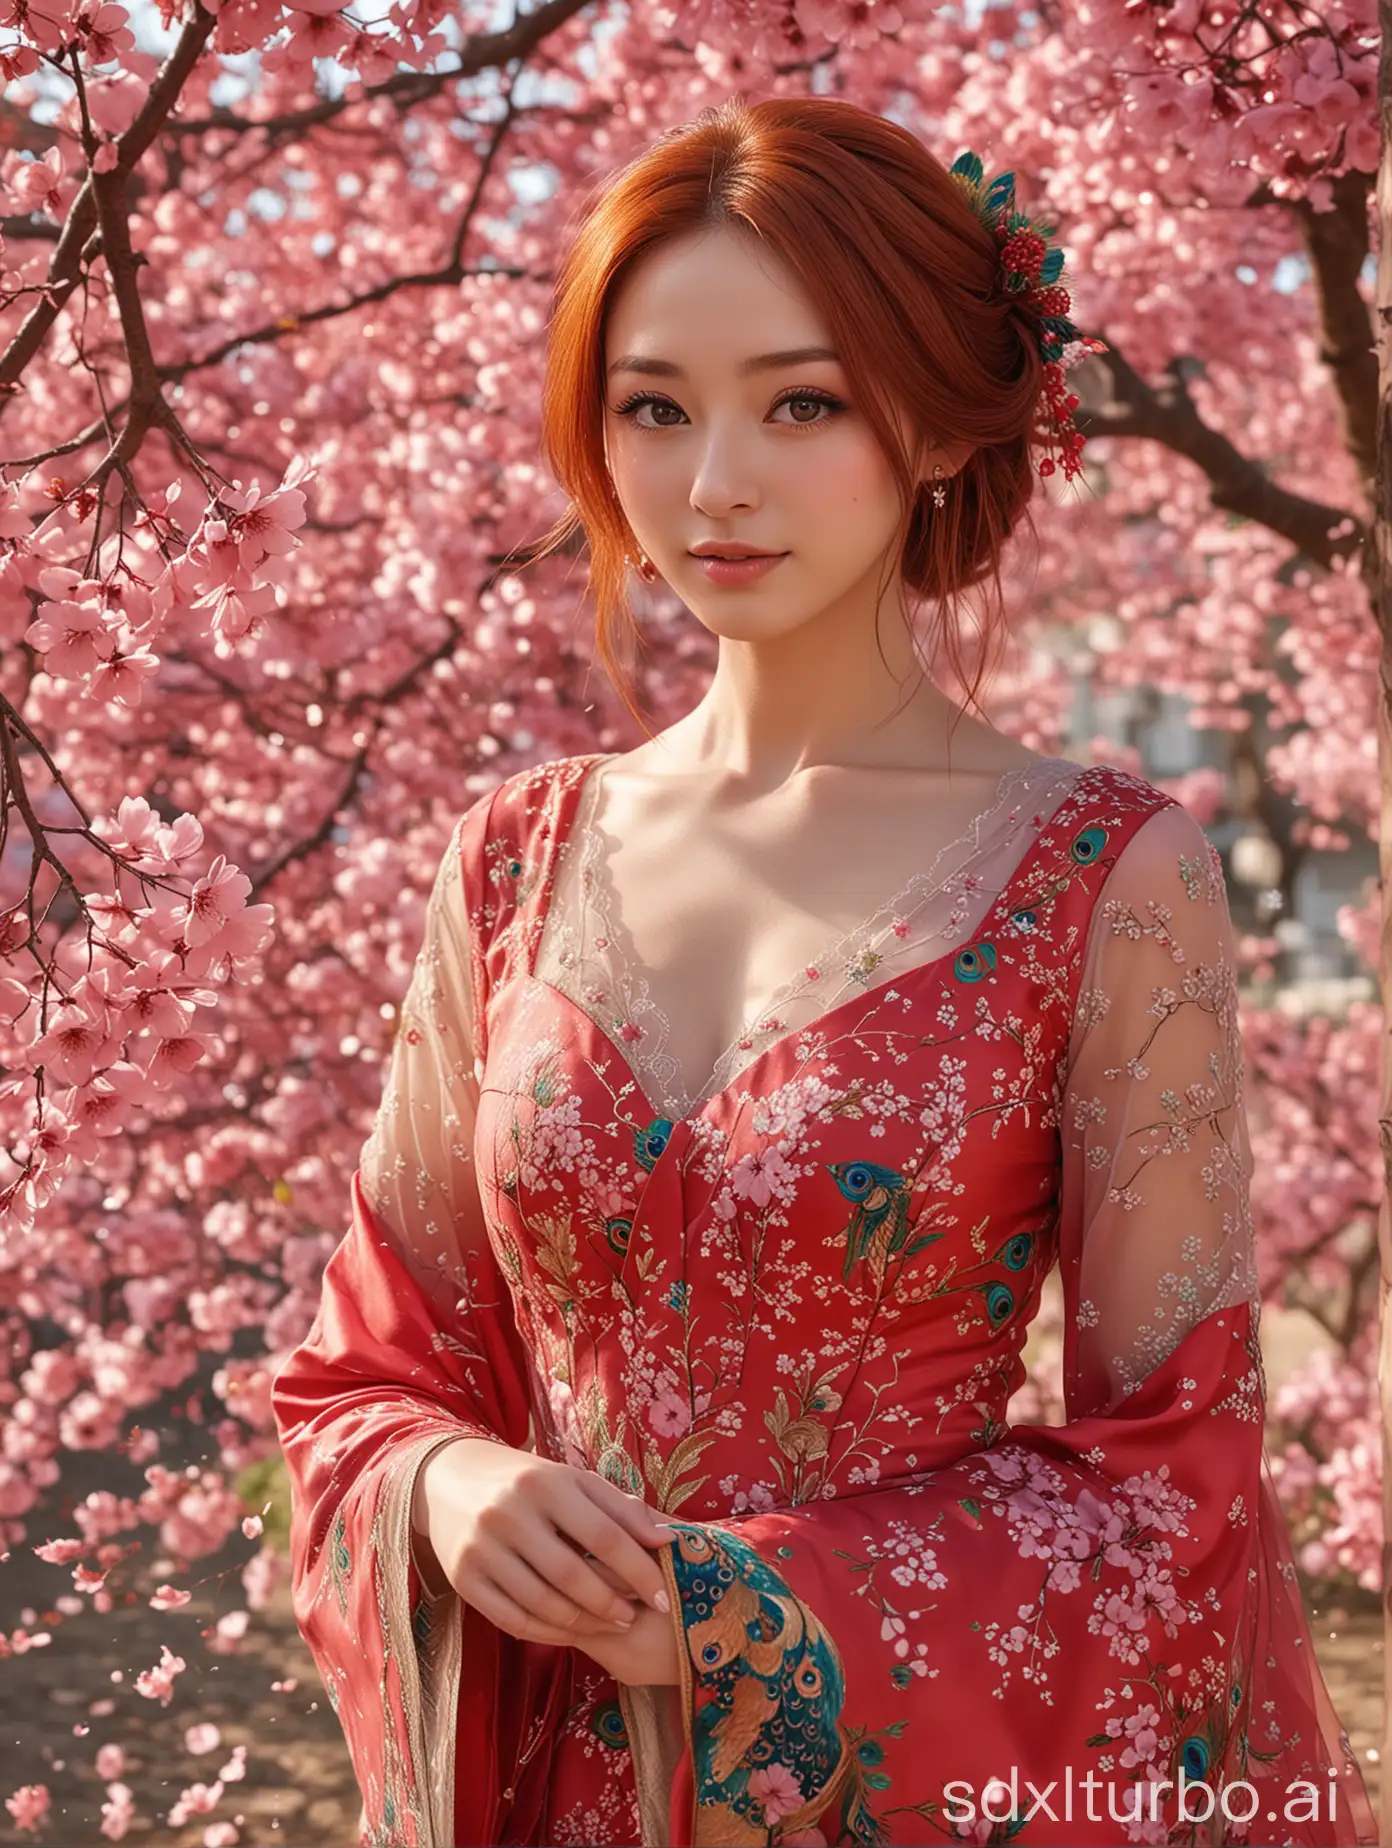 Charming-RedHaired-Woman-in-Peacock-Dress-under-Sakura-Tree